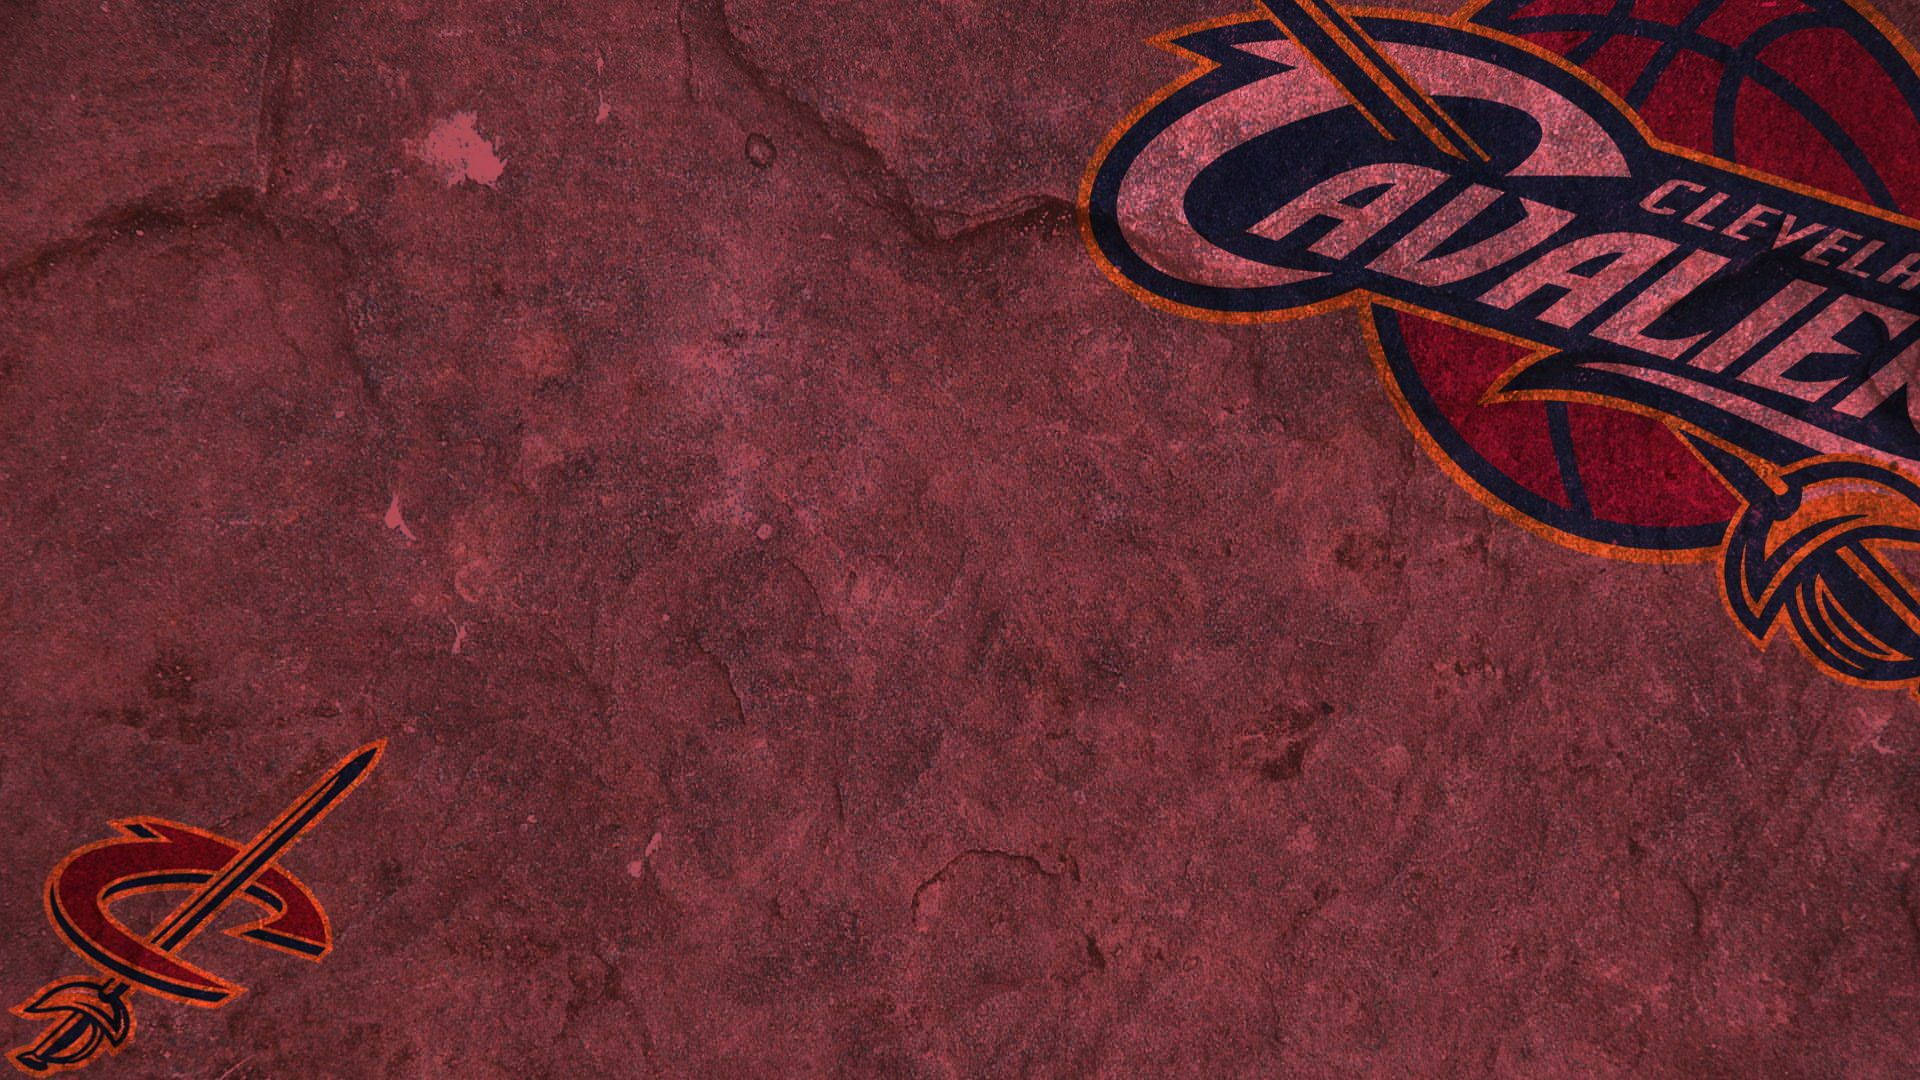 Cleveland Cavaliers Monochromatic Red Poster Wallpaper